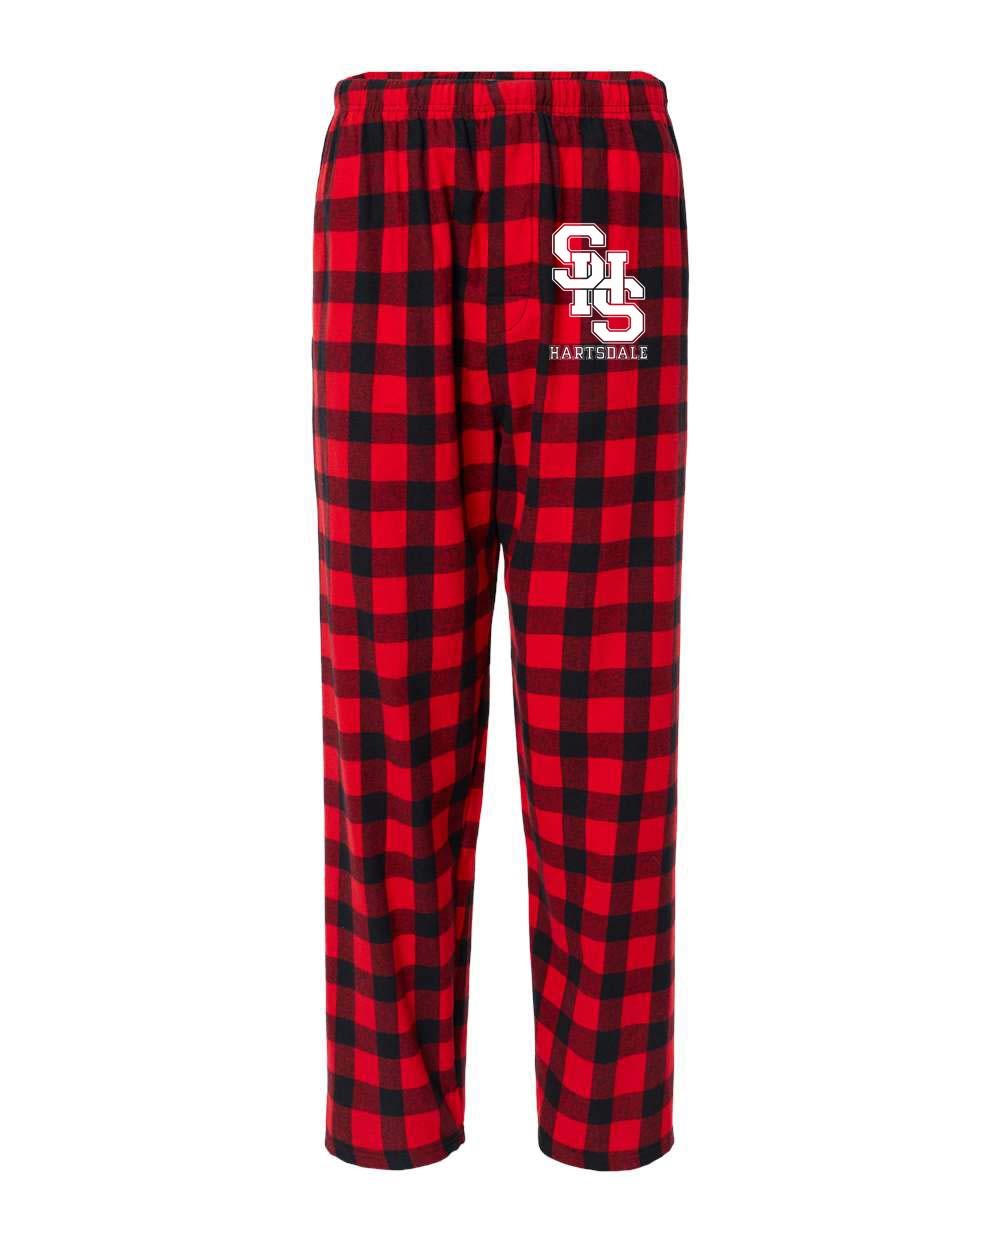 SHS Staff Men's Pajama Pants w/ White Logo - Please Allow 2-3 Weeks for Delivery